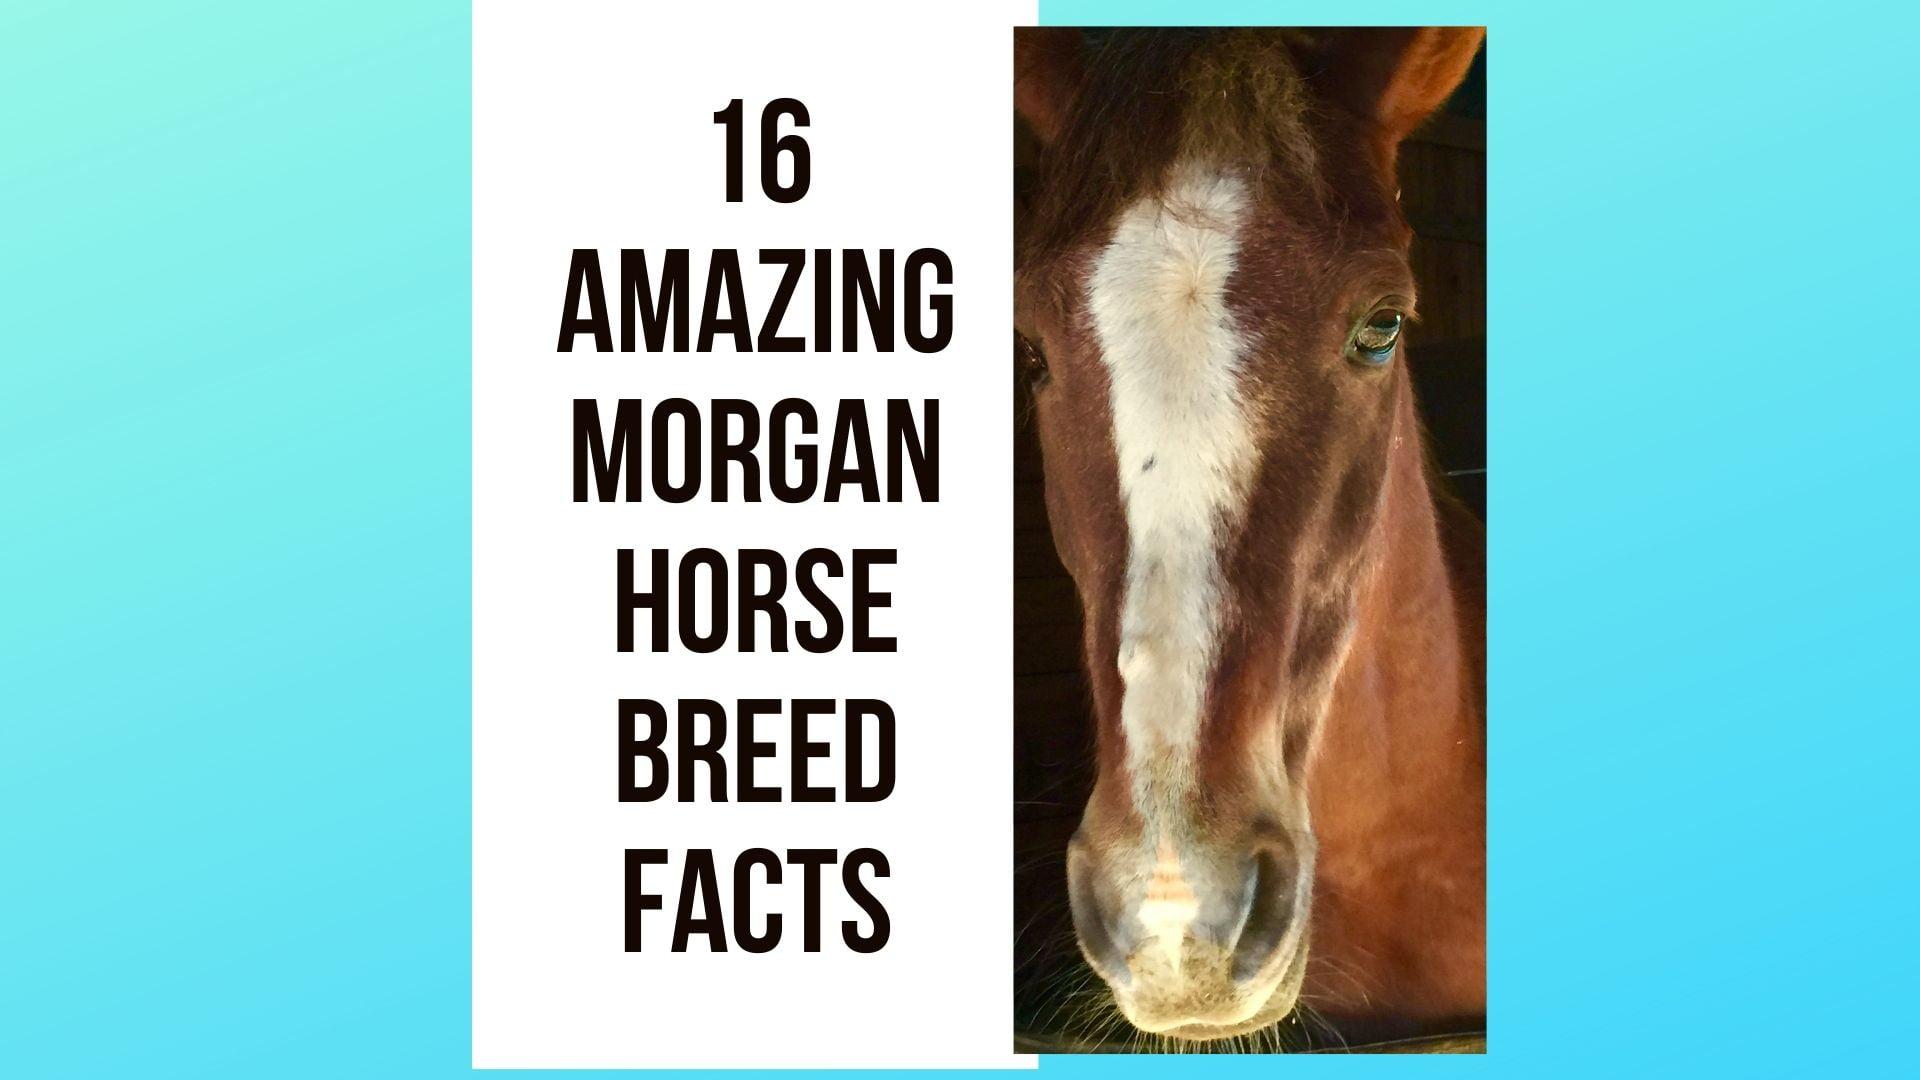 16 Amazing Morgan Horse Breed facts